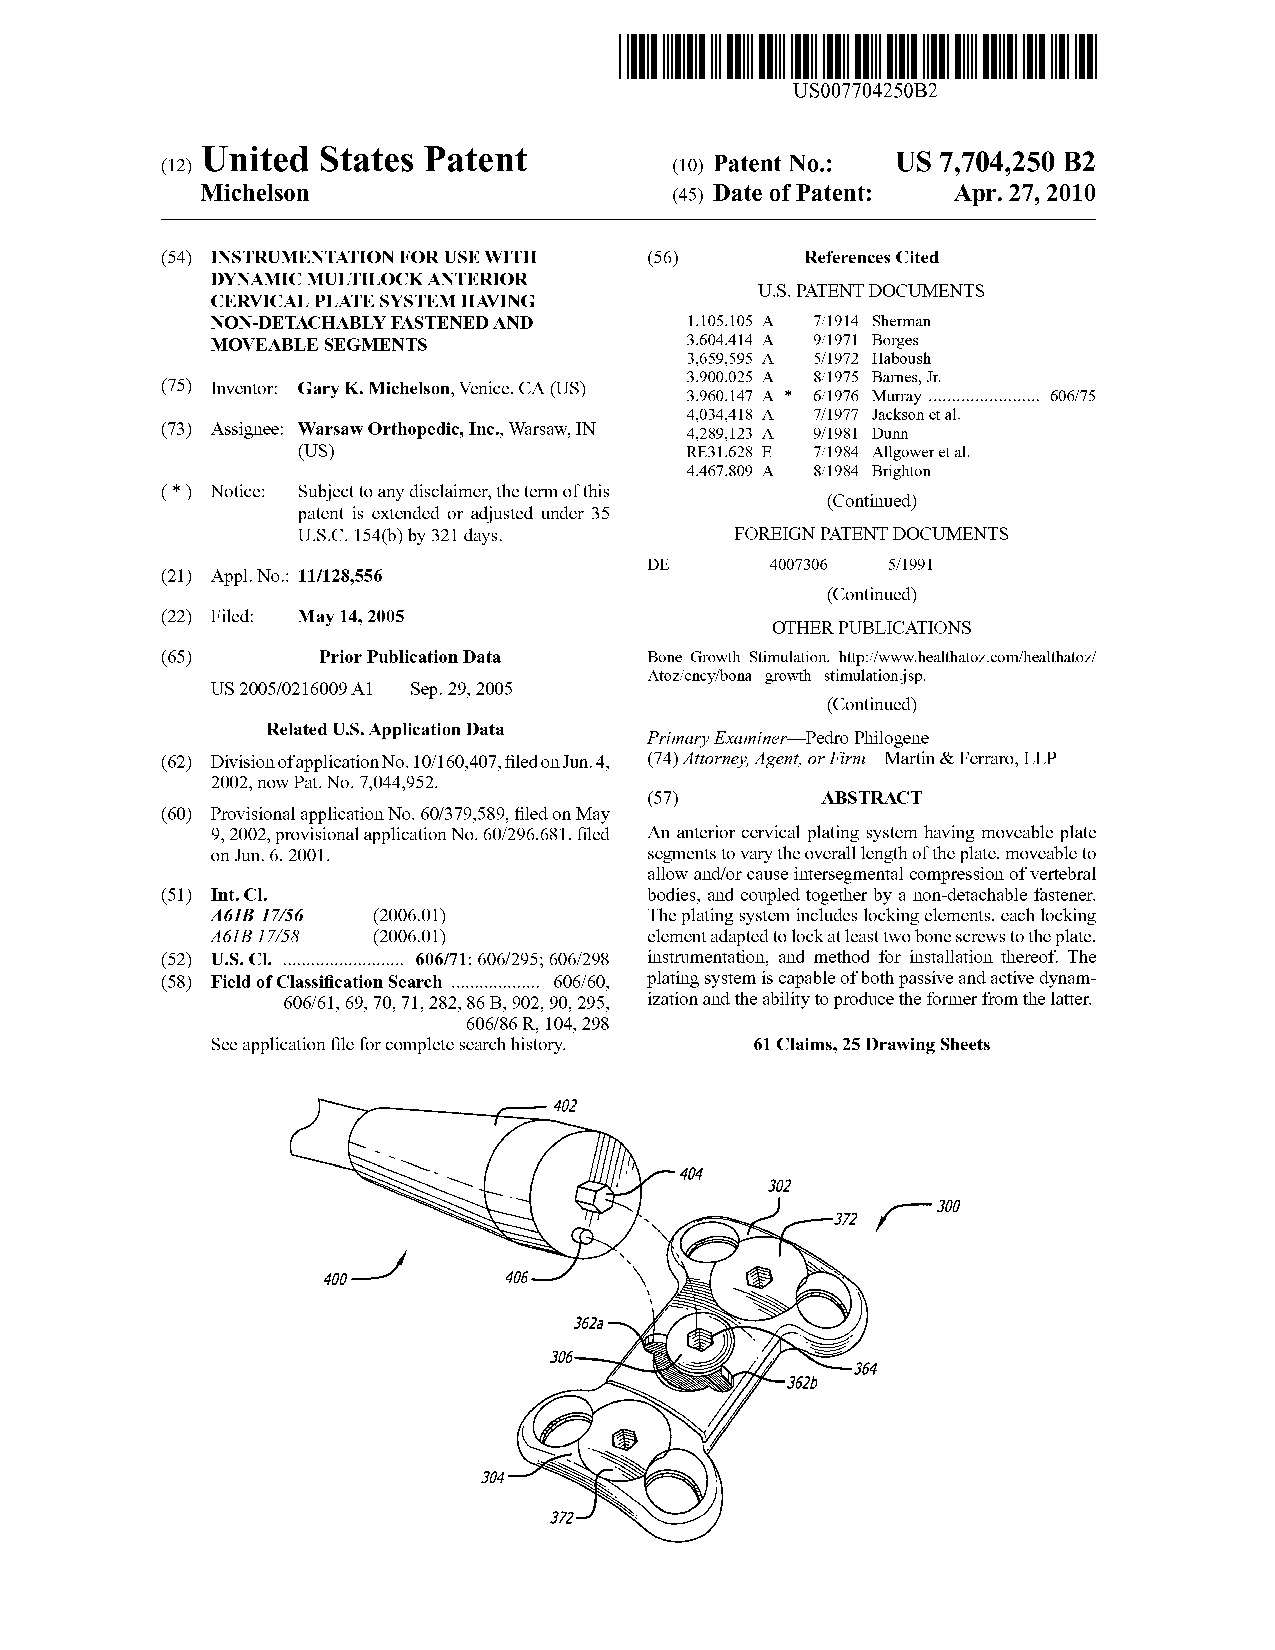 Instrumentation for use with dynamic multilock anterior cervical plate     system having non-detachably fastened and moveable segments - Patent 7,704,250